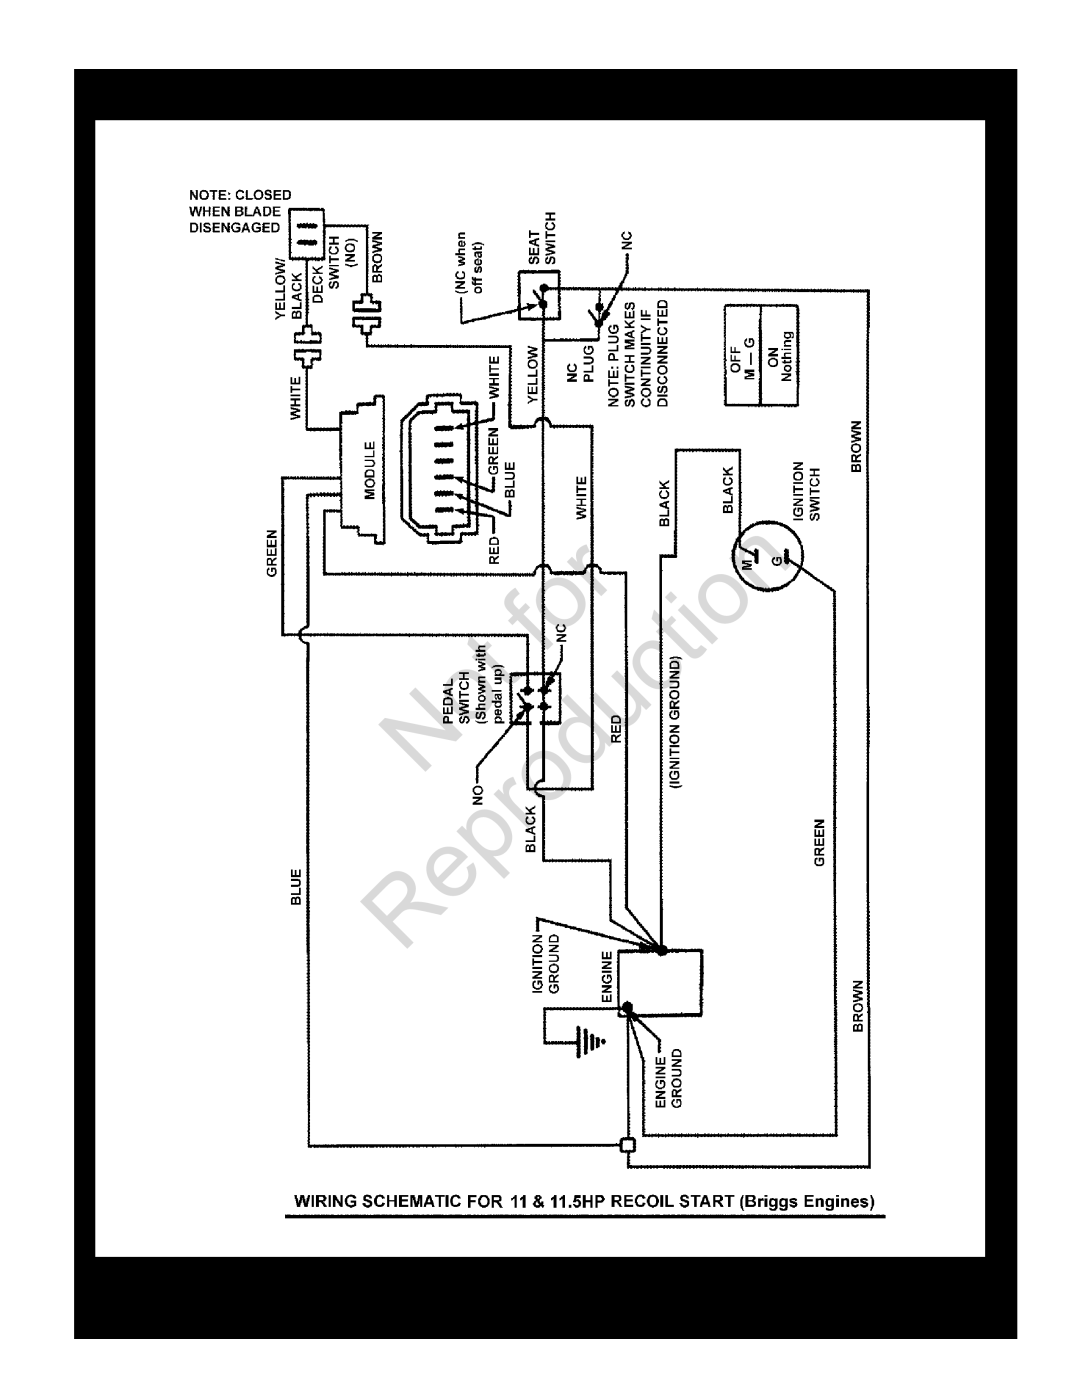 Snapper 84882 Wiring Schematic 11 & 11.5HP Briggs Recoil Start, Reproduction, Manual No, 7006278, Standard Deck, Series 